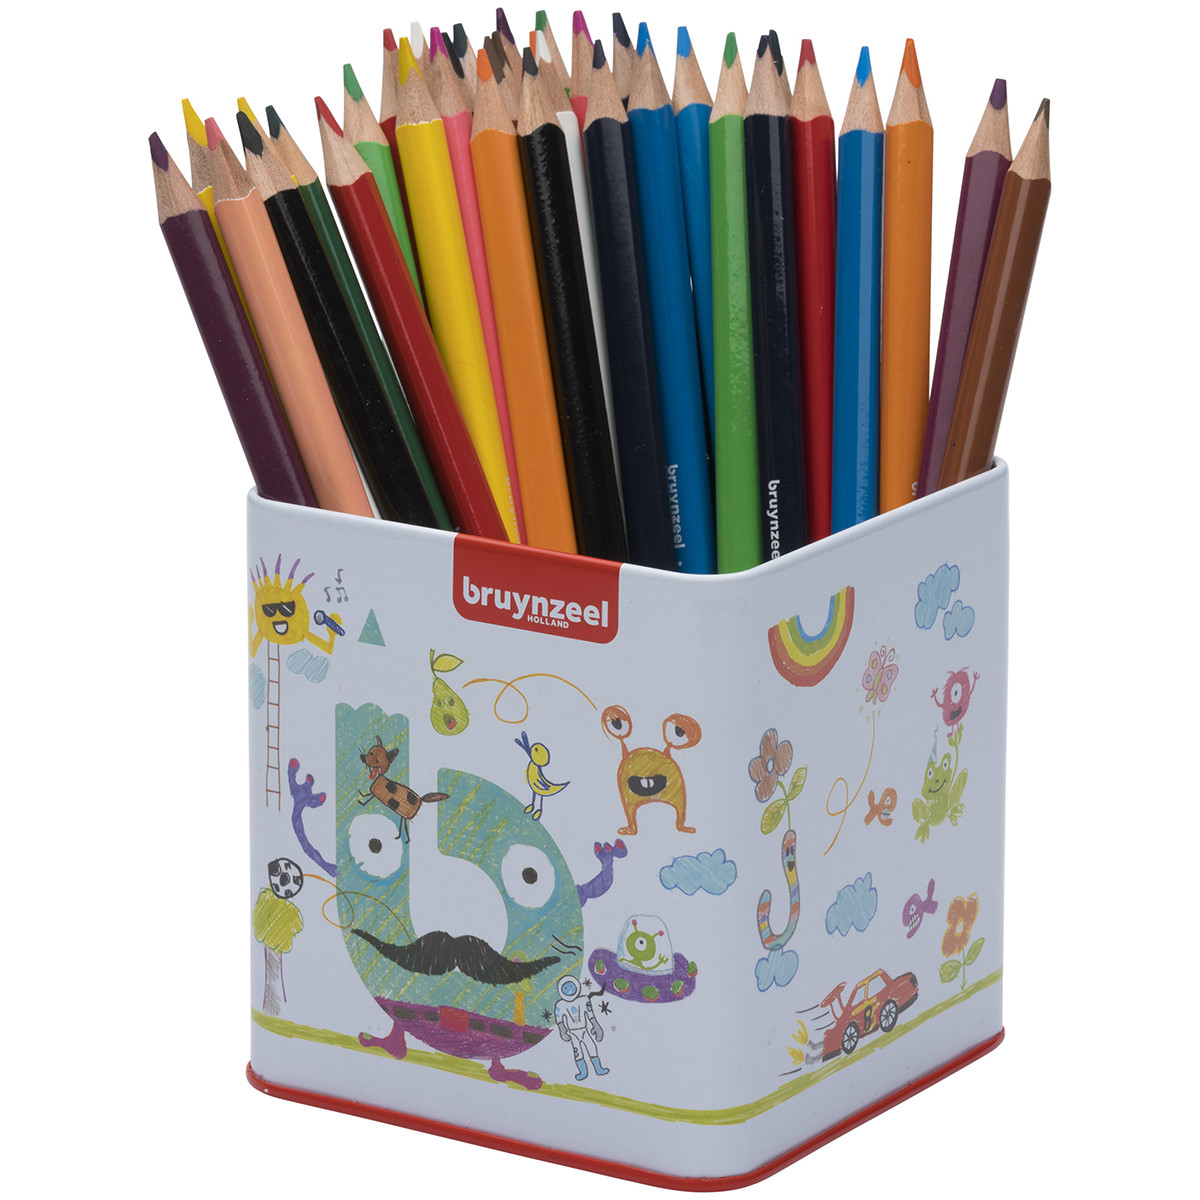 Bruynzeel Triple Colour Pencils - Assorted Colours (Pack of 48)